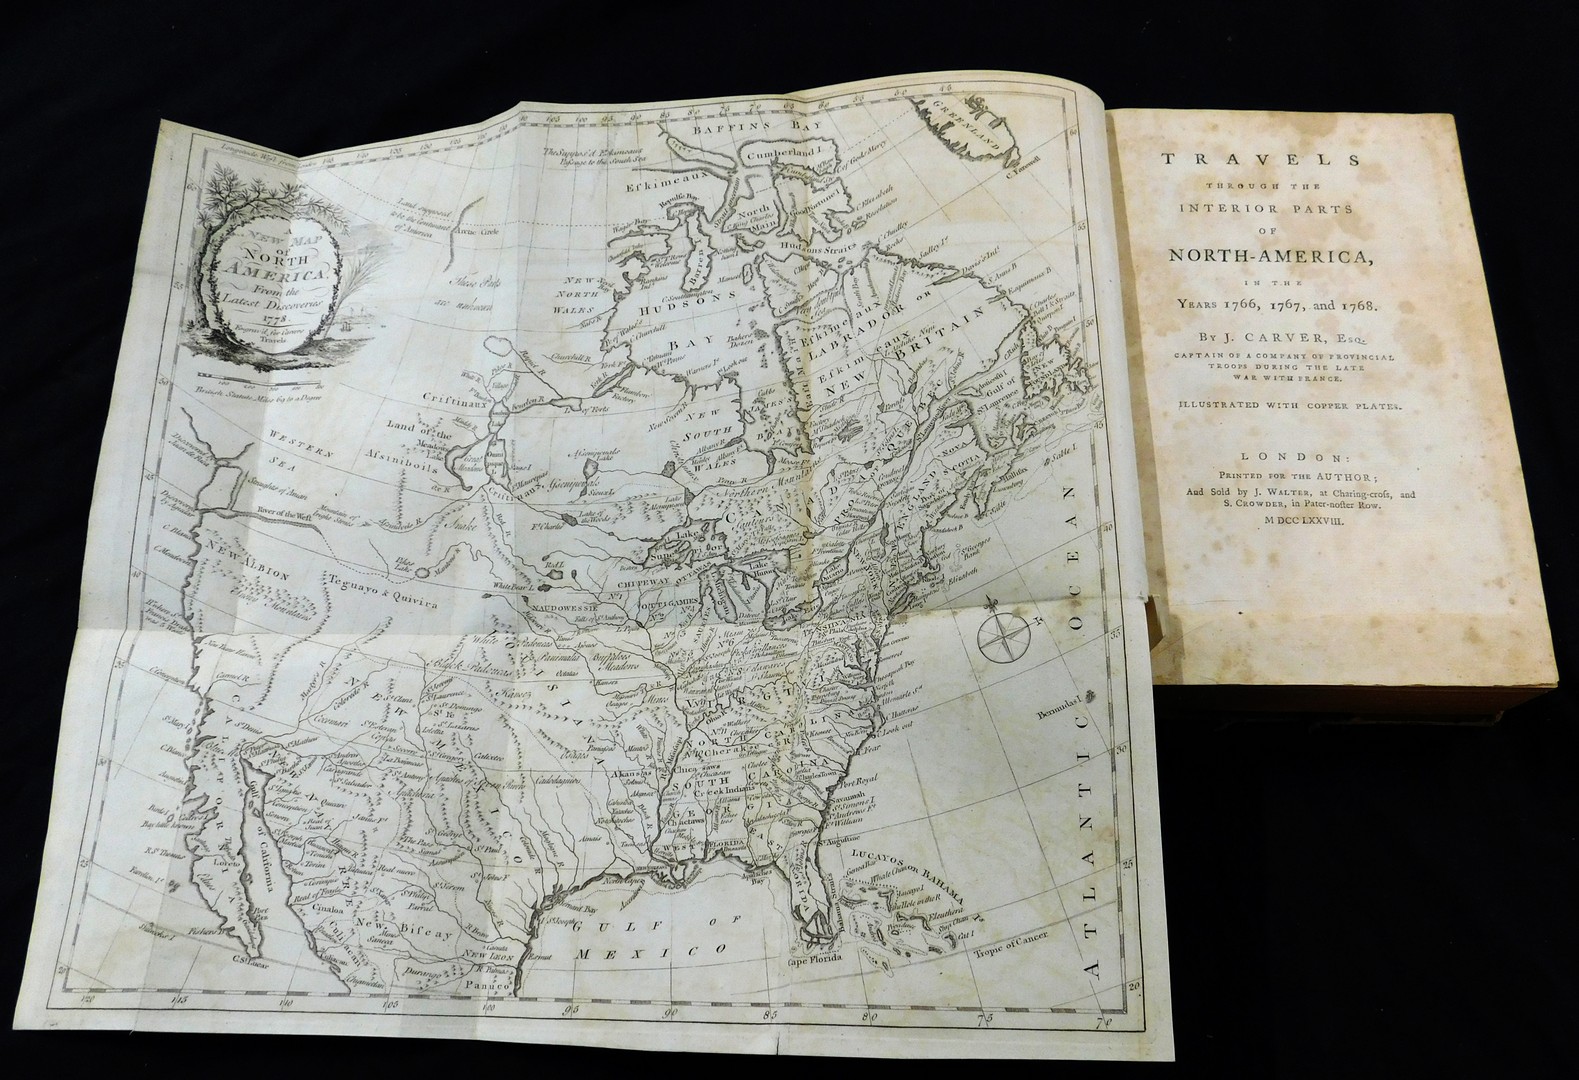 JONATHAN CARVER: TRAVELS THROUGH THE INTERIOR PARTS OF NORTH-AMERICA IN THE YEARS 1766, 1767 AND